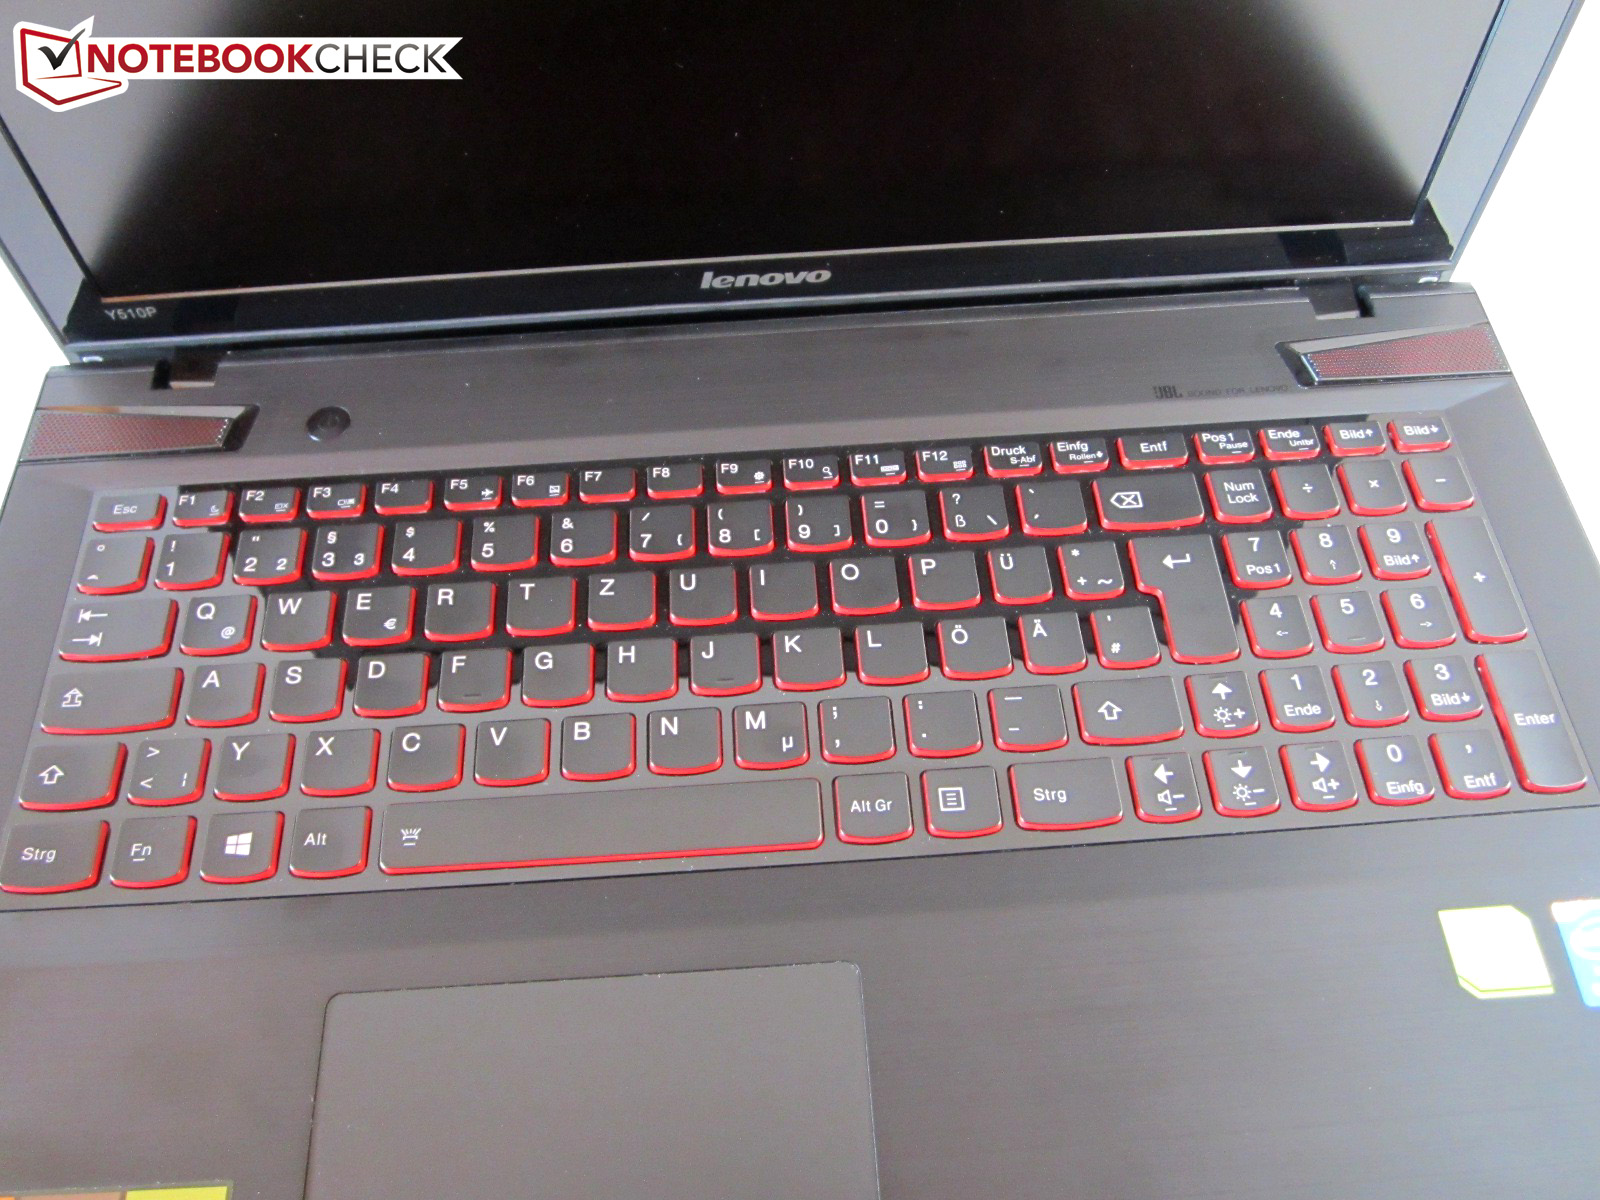 Review Lenovo IdeaPad Y510p Notebook - NotebookCheck.net Reviews